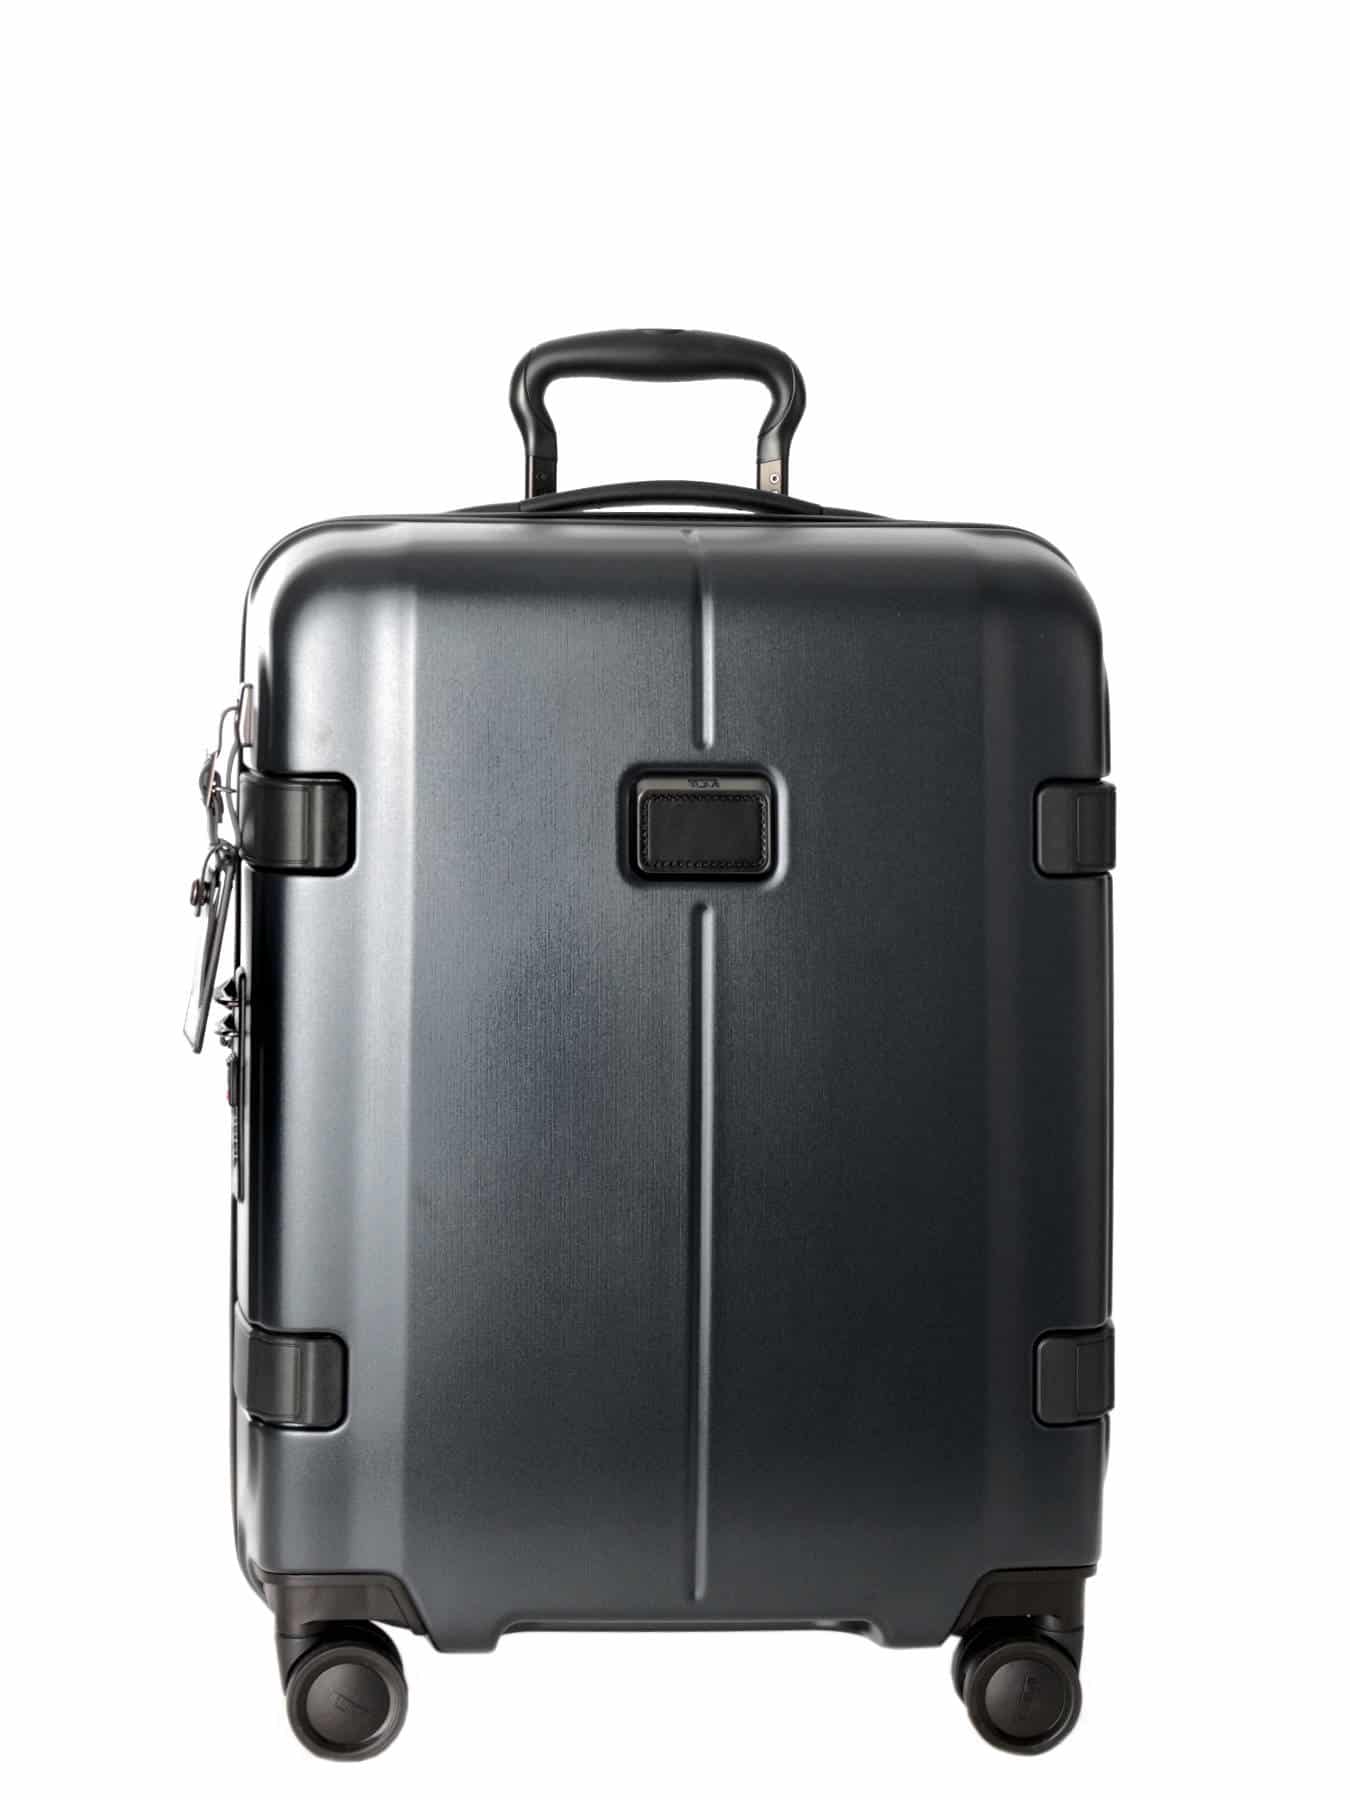 Can You Get Tumi Luggage Monogrammed In-Store?